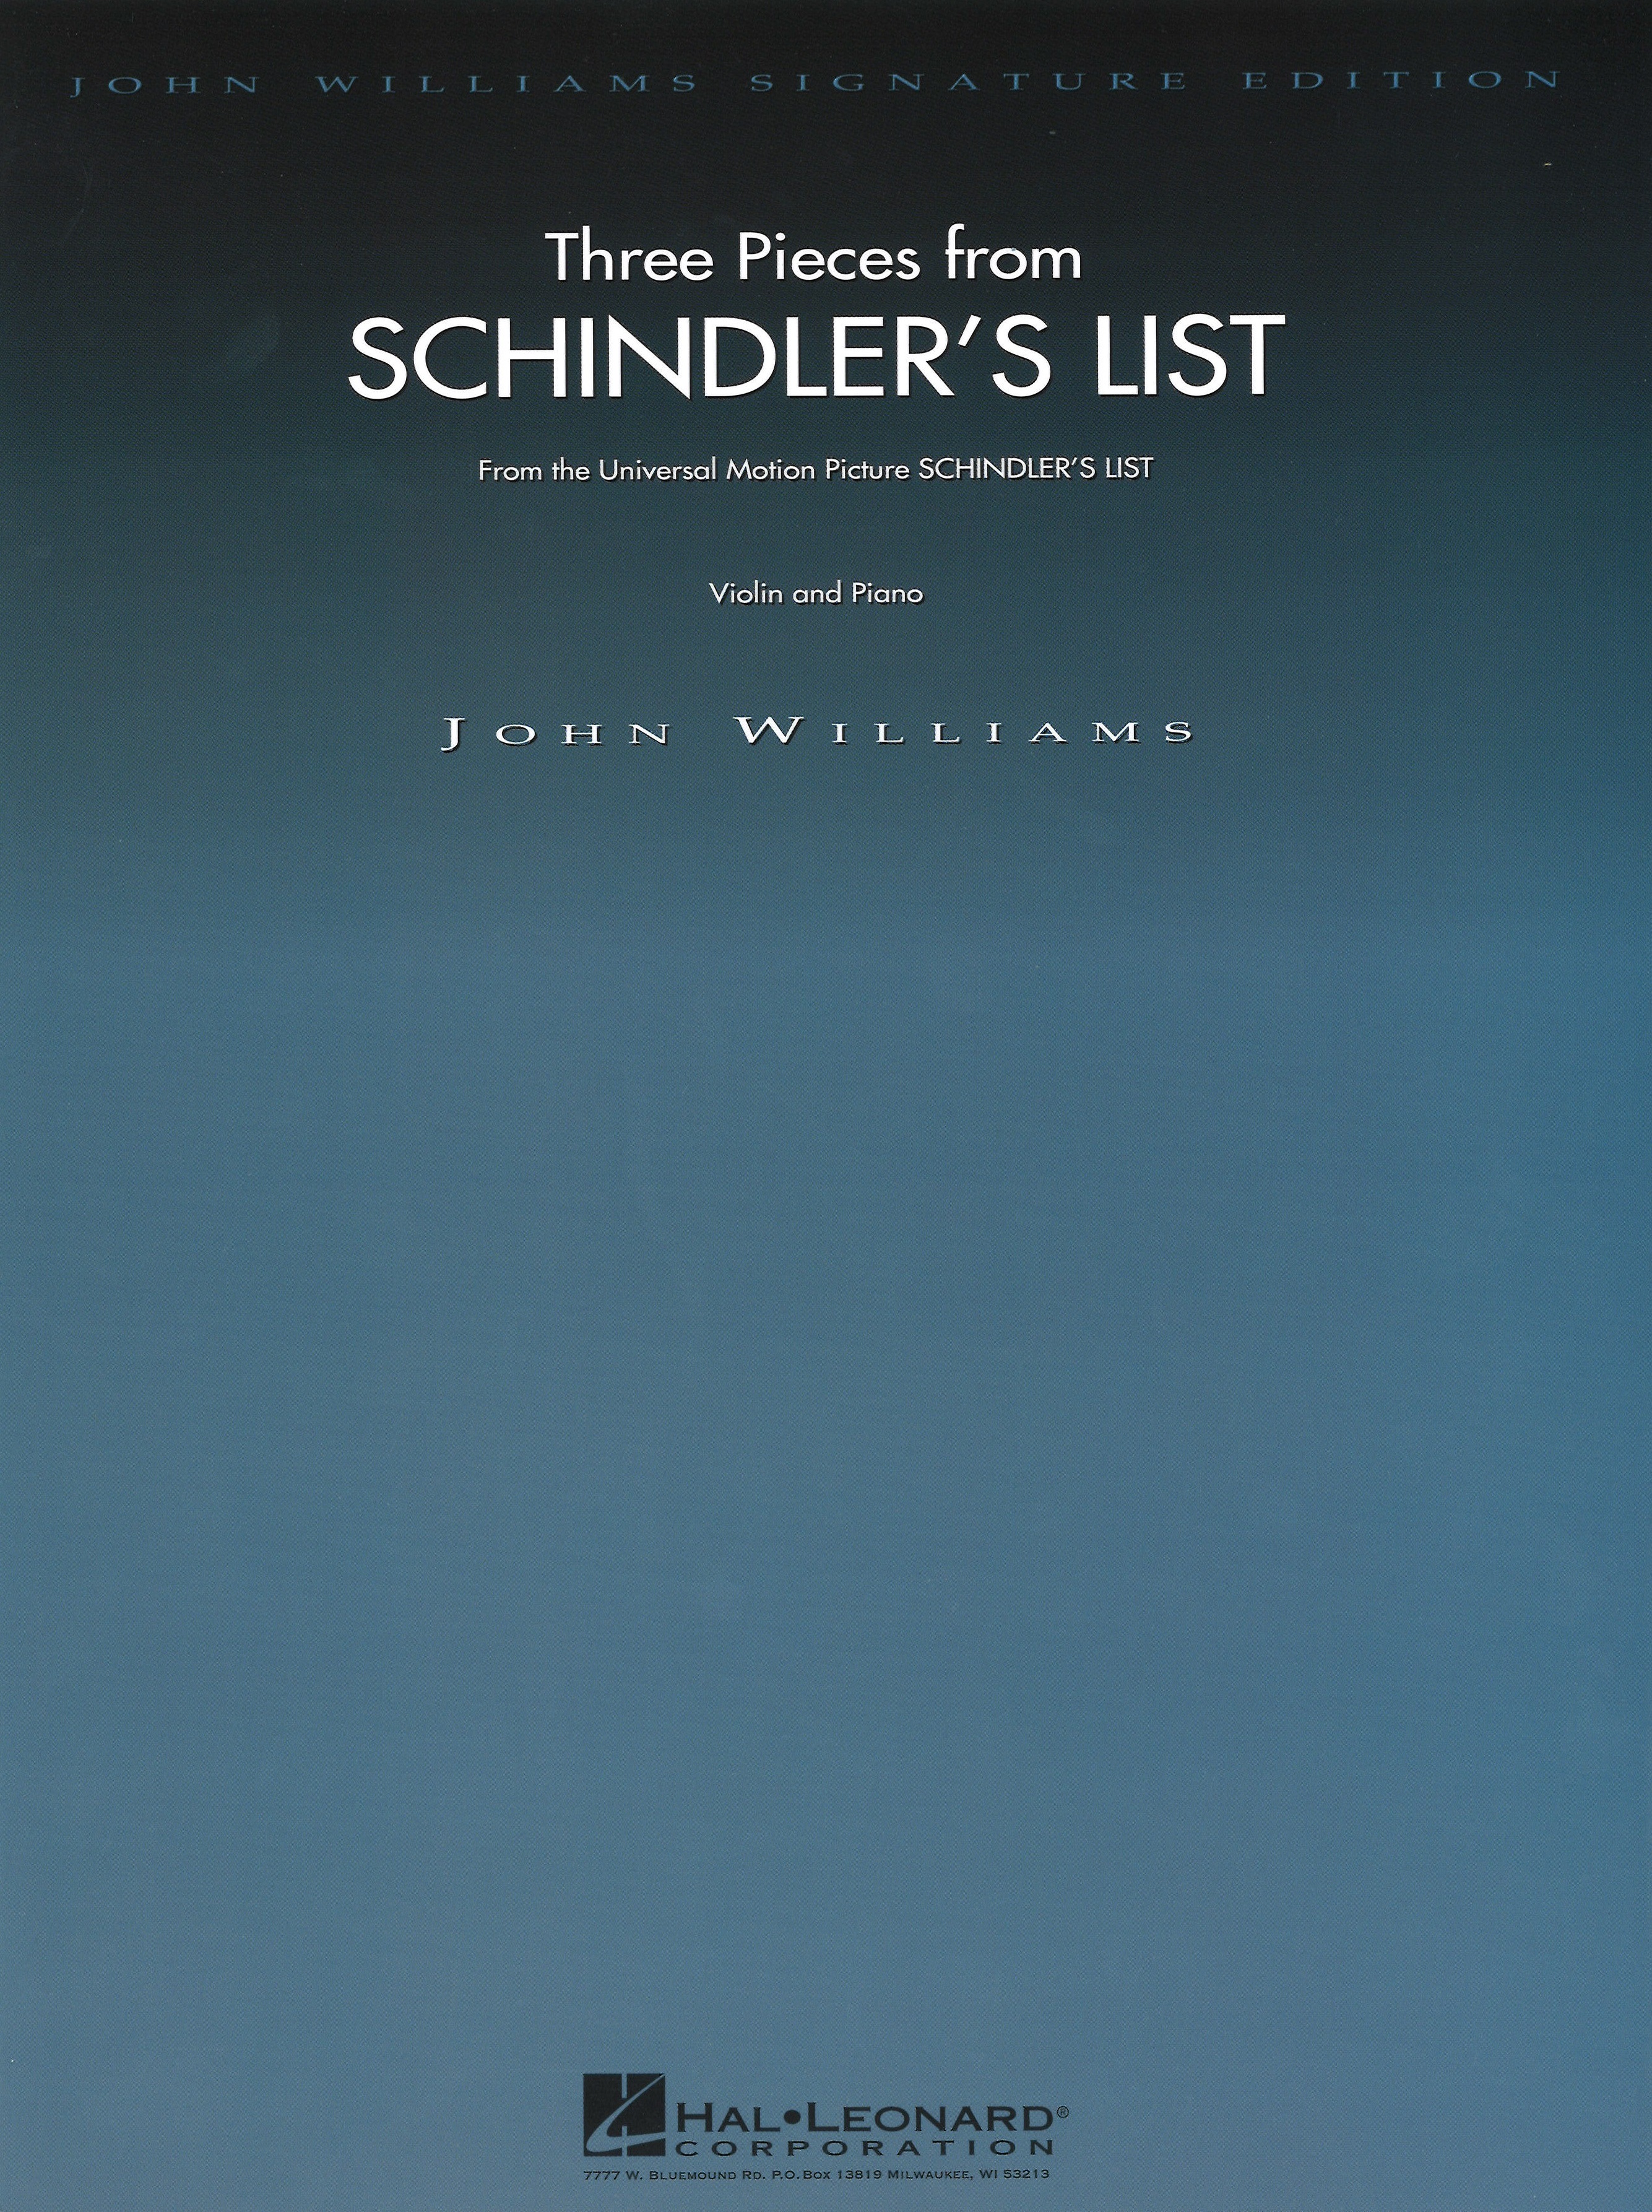 Schindlers List 3 Pieces Violin & Piano Sheet Music Songbook